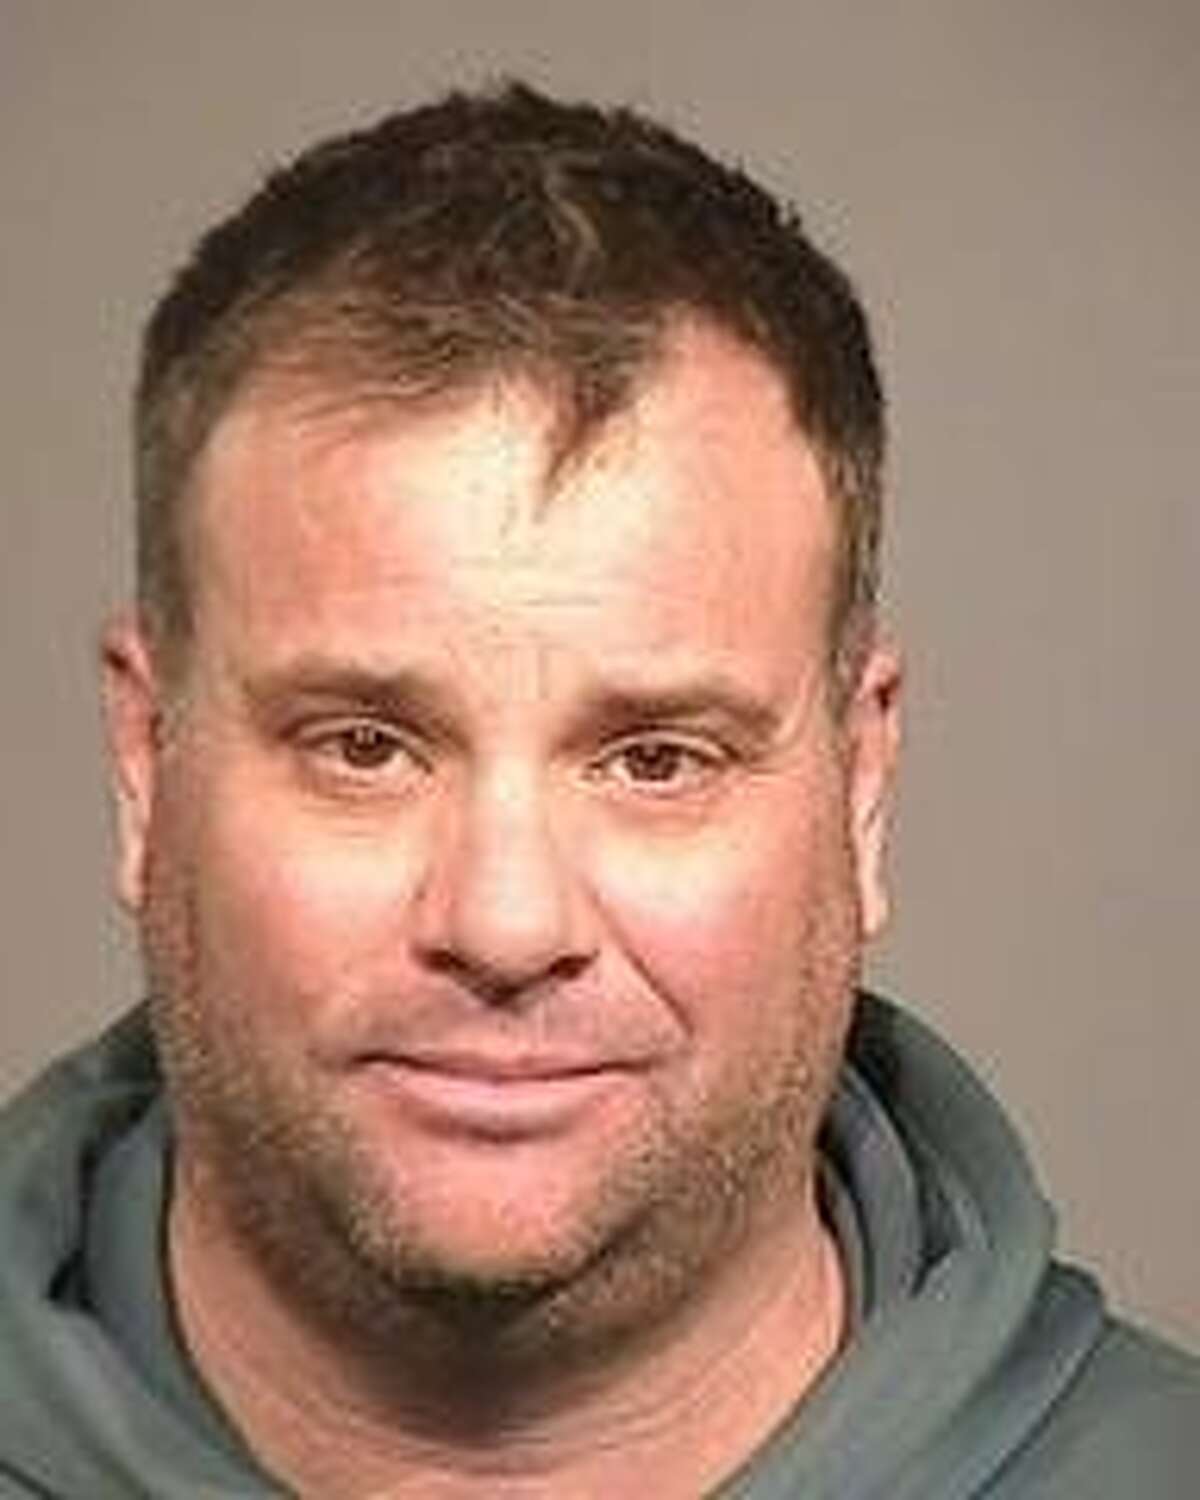 Casey Connaway, 43, was booked into jail on suspicion of three felony sex-related charges, according to the Sonoma County Sheriff’s Office. He was released that same day on $120,000 bail.